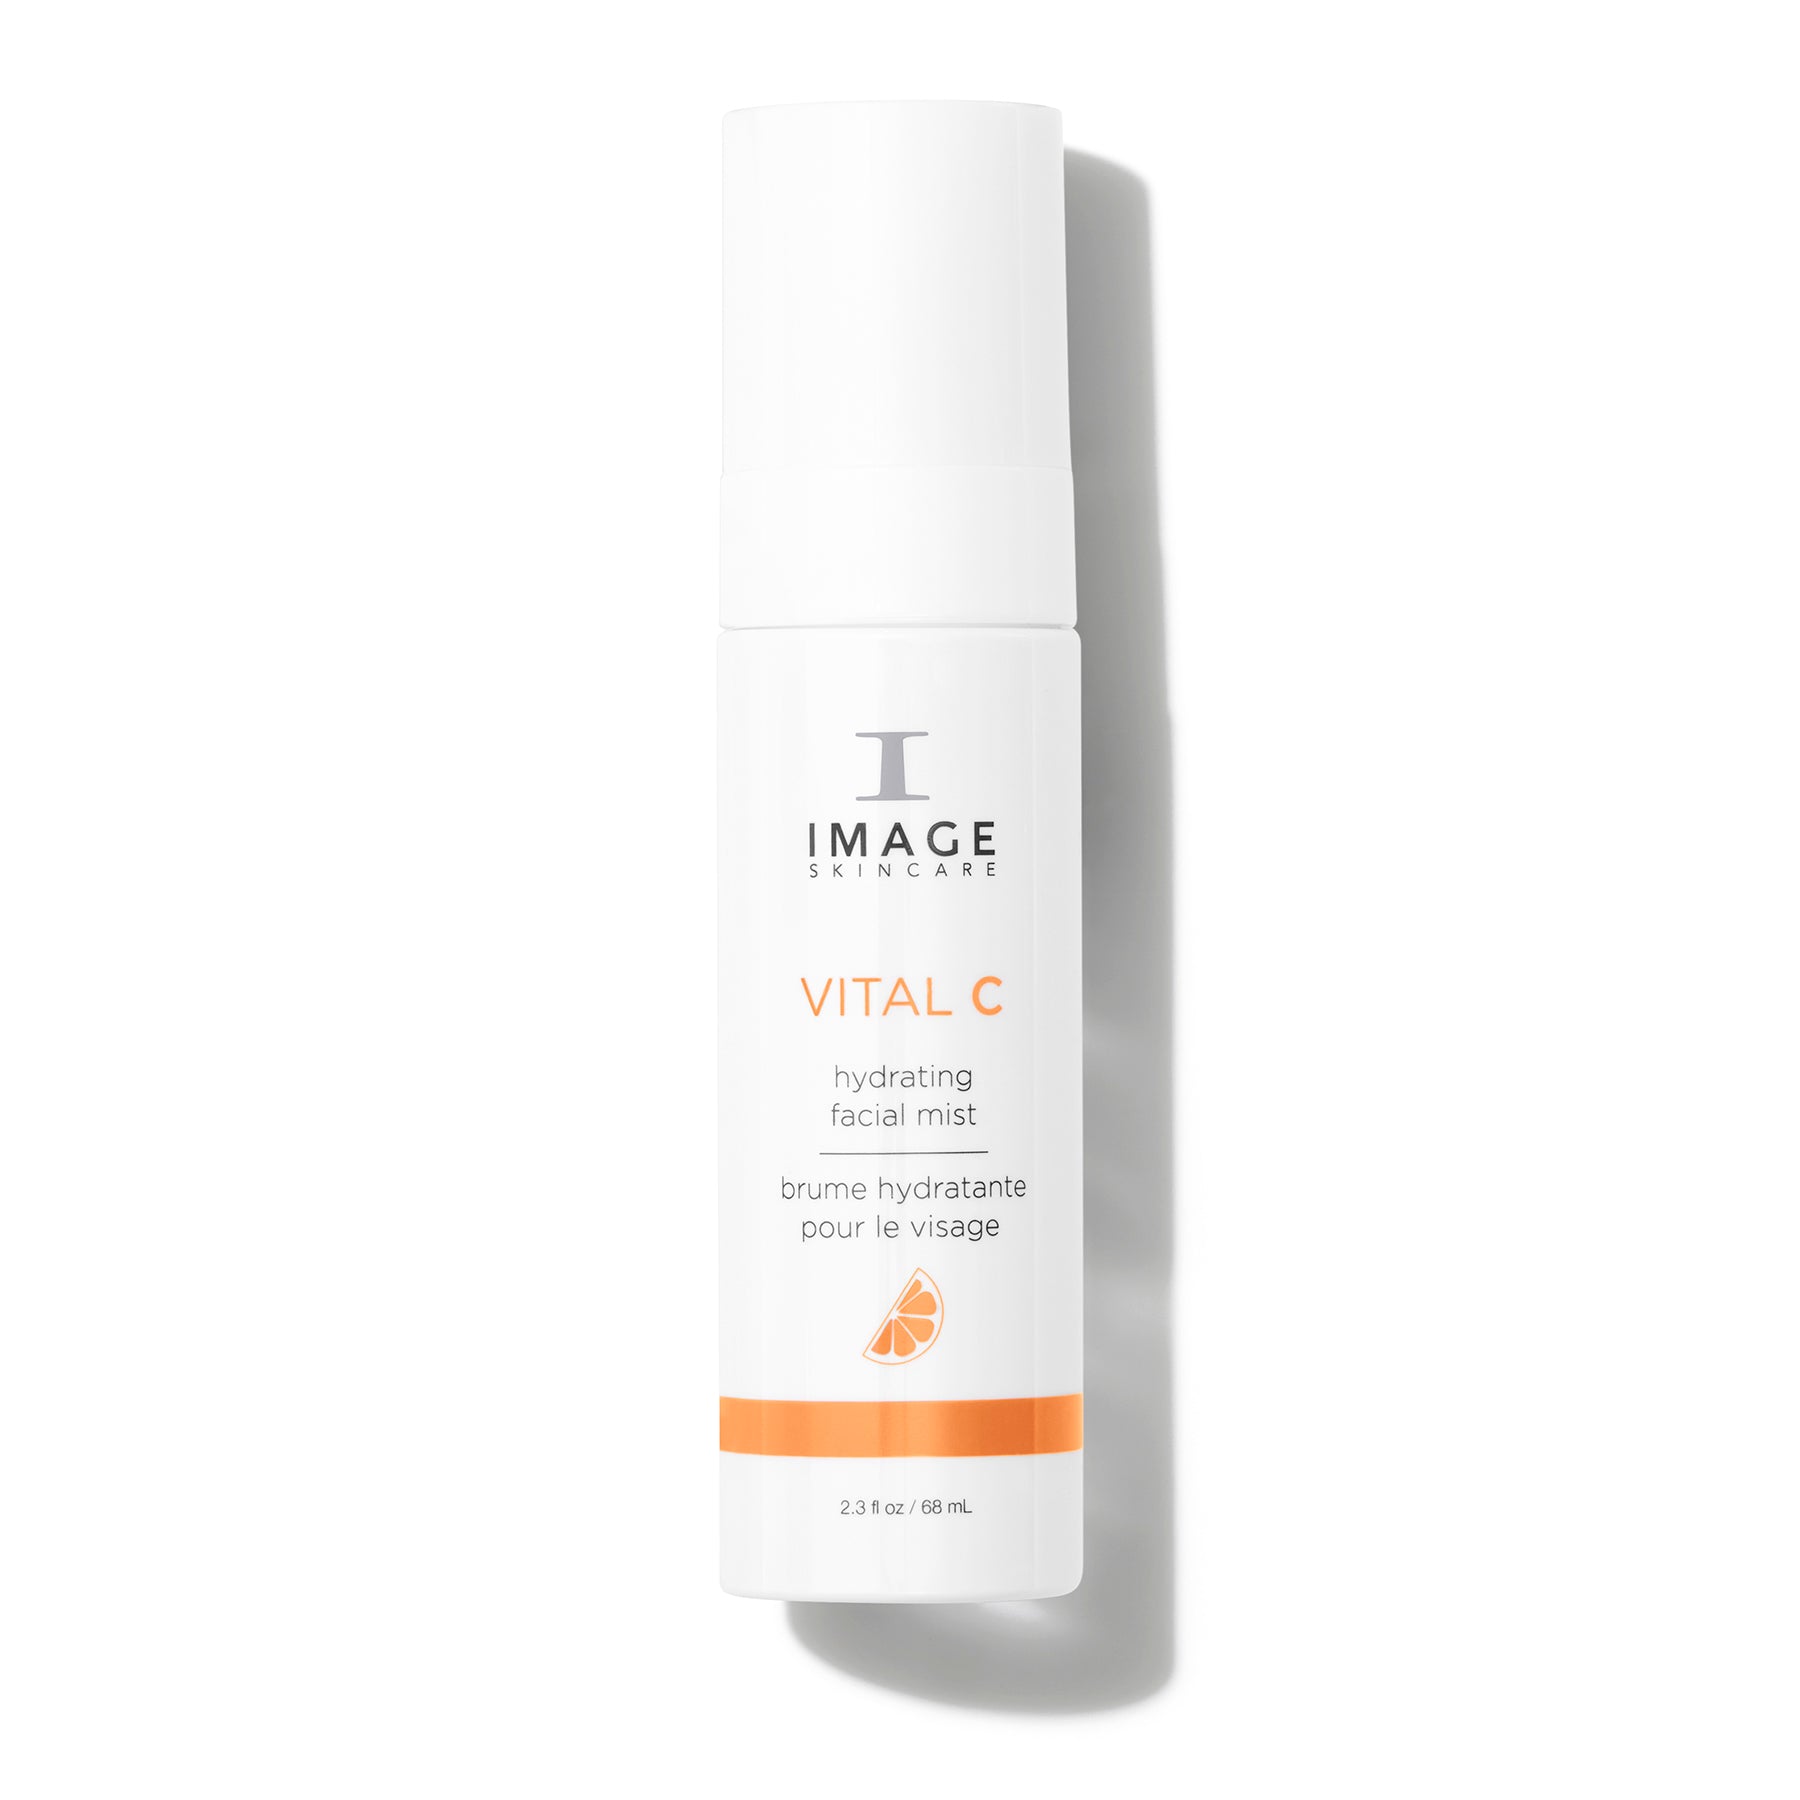 Image Skincare Vital C Hydrating Facial Mist Shop At Exclusive Beauty